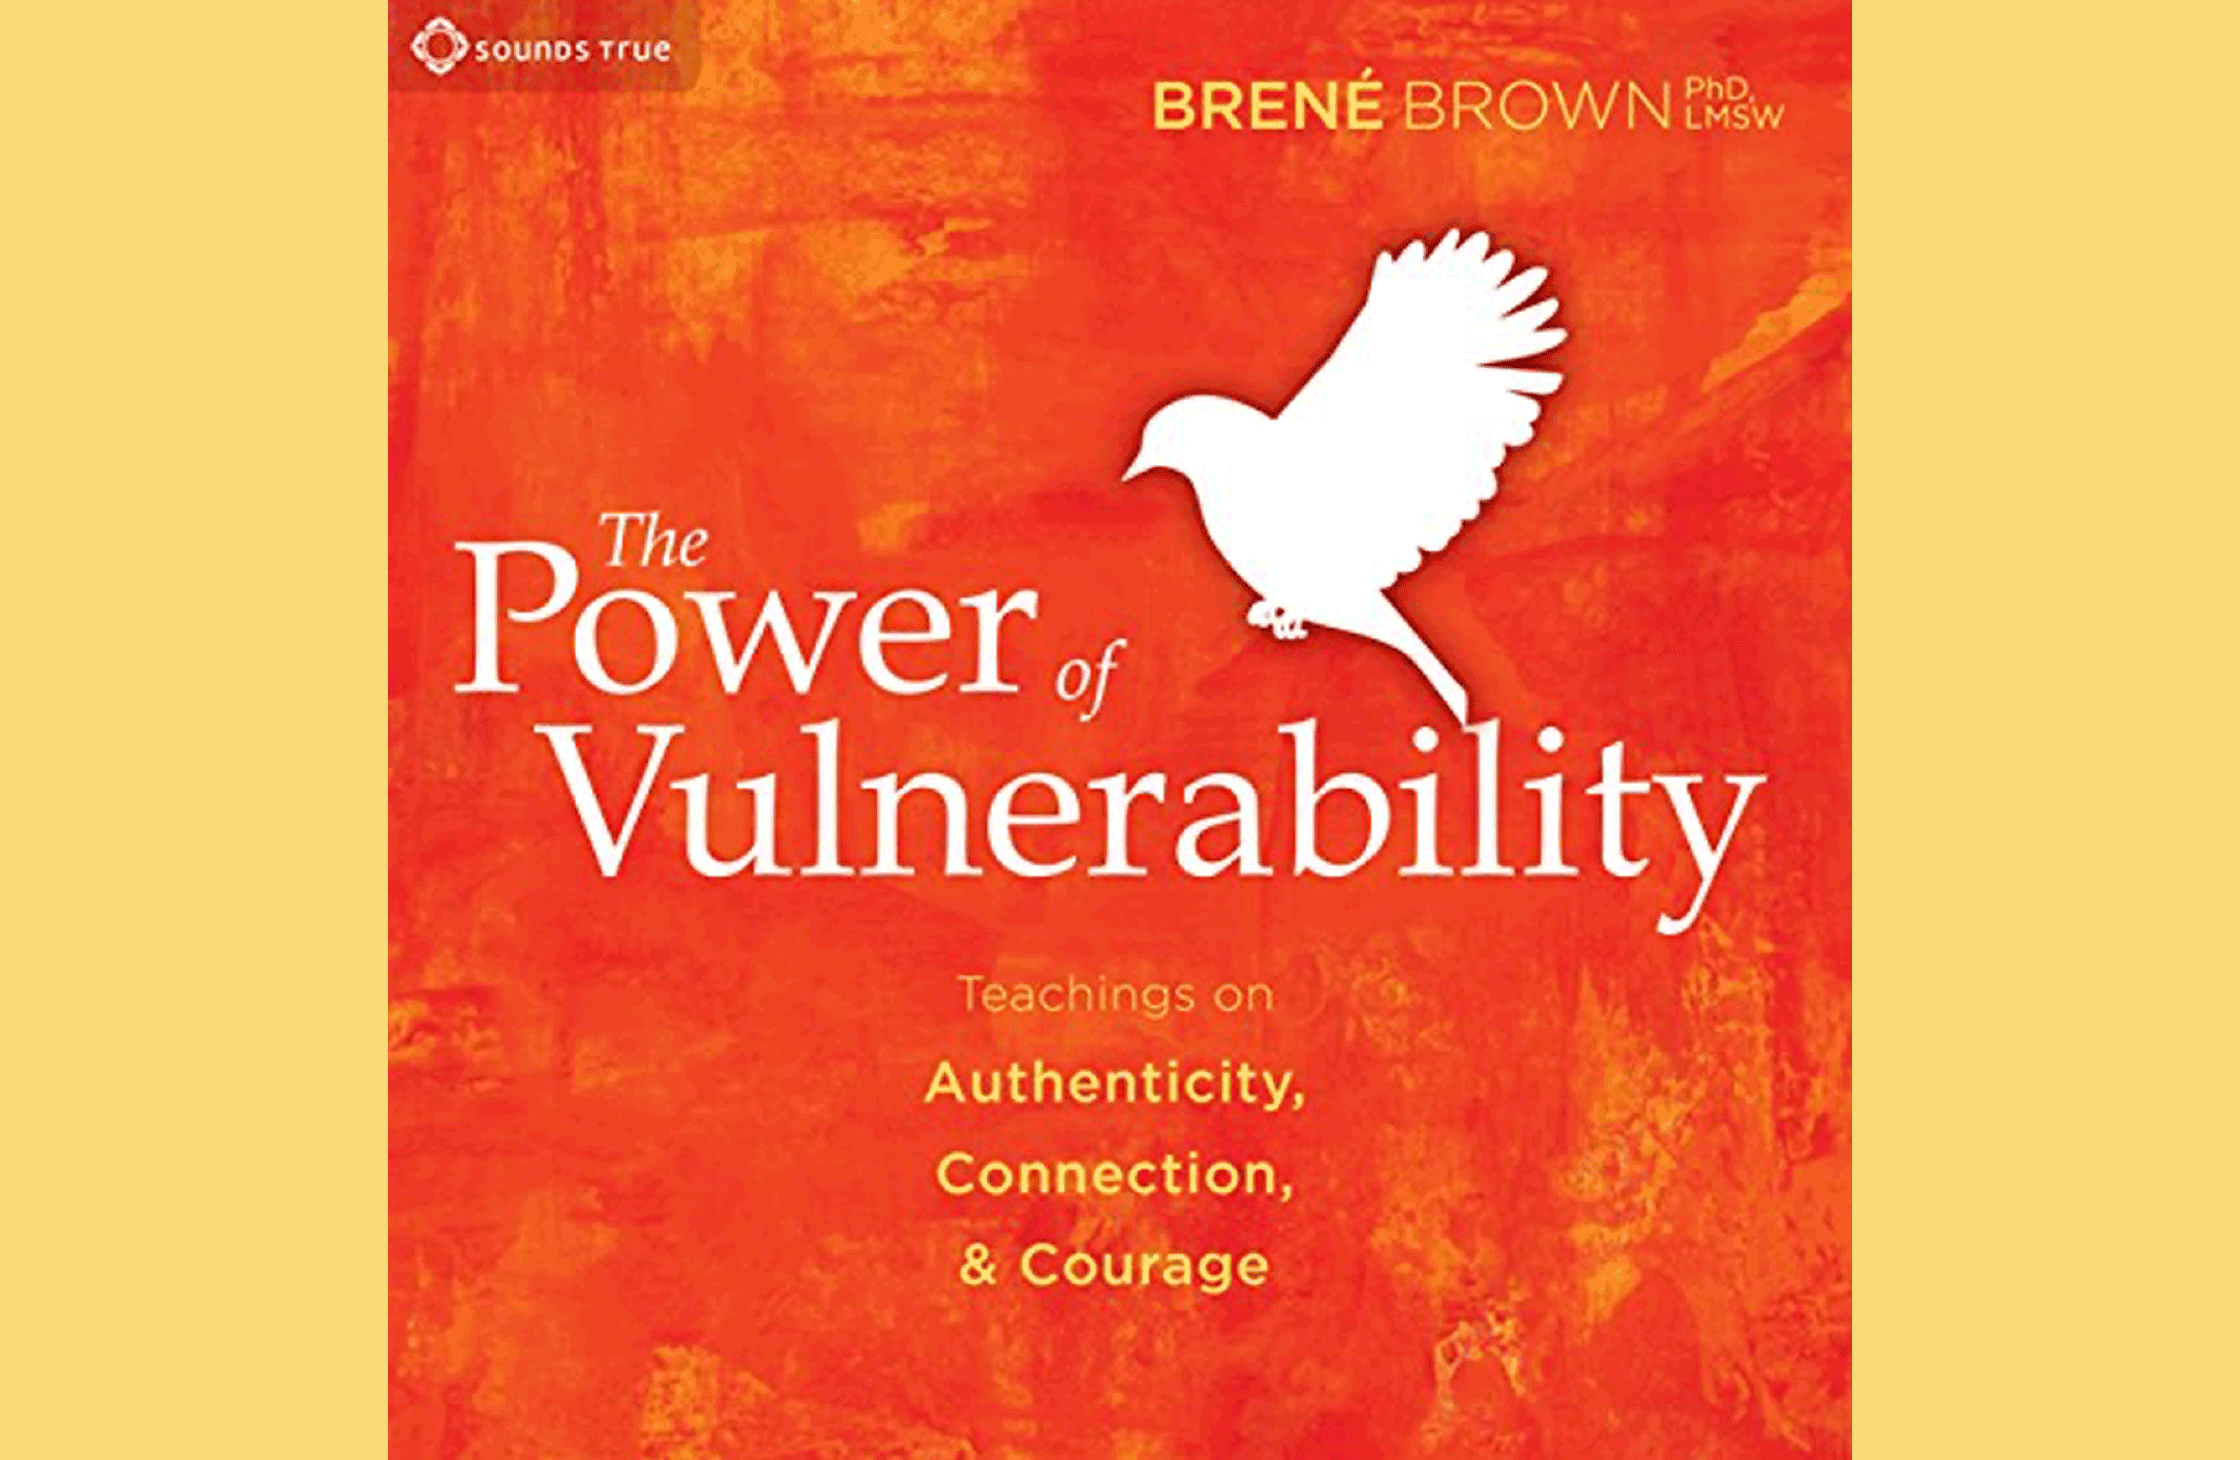 Summary: The Power of Vulnerability by Brené Brown